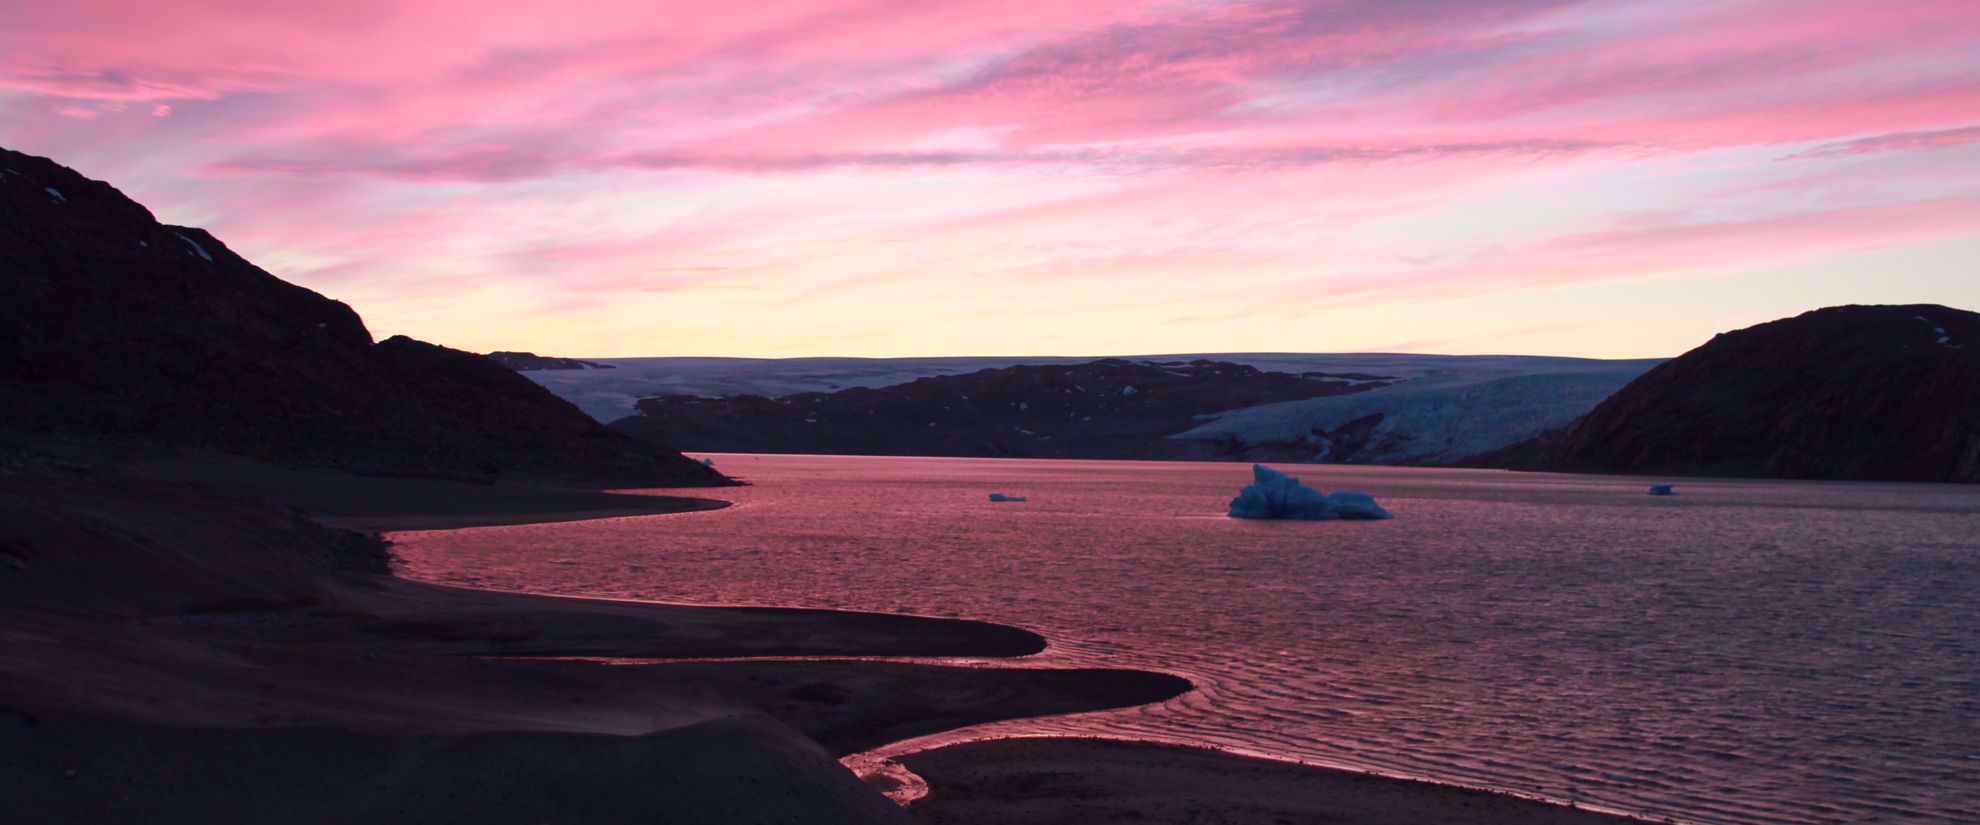 pastel pink sunset over lake in greenland